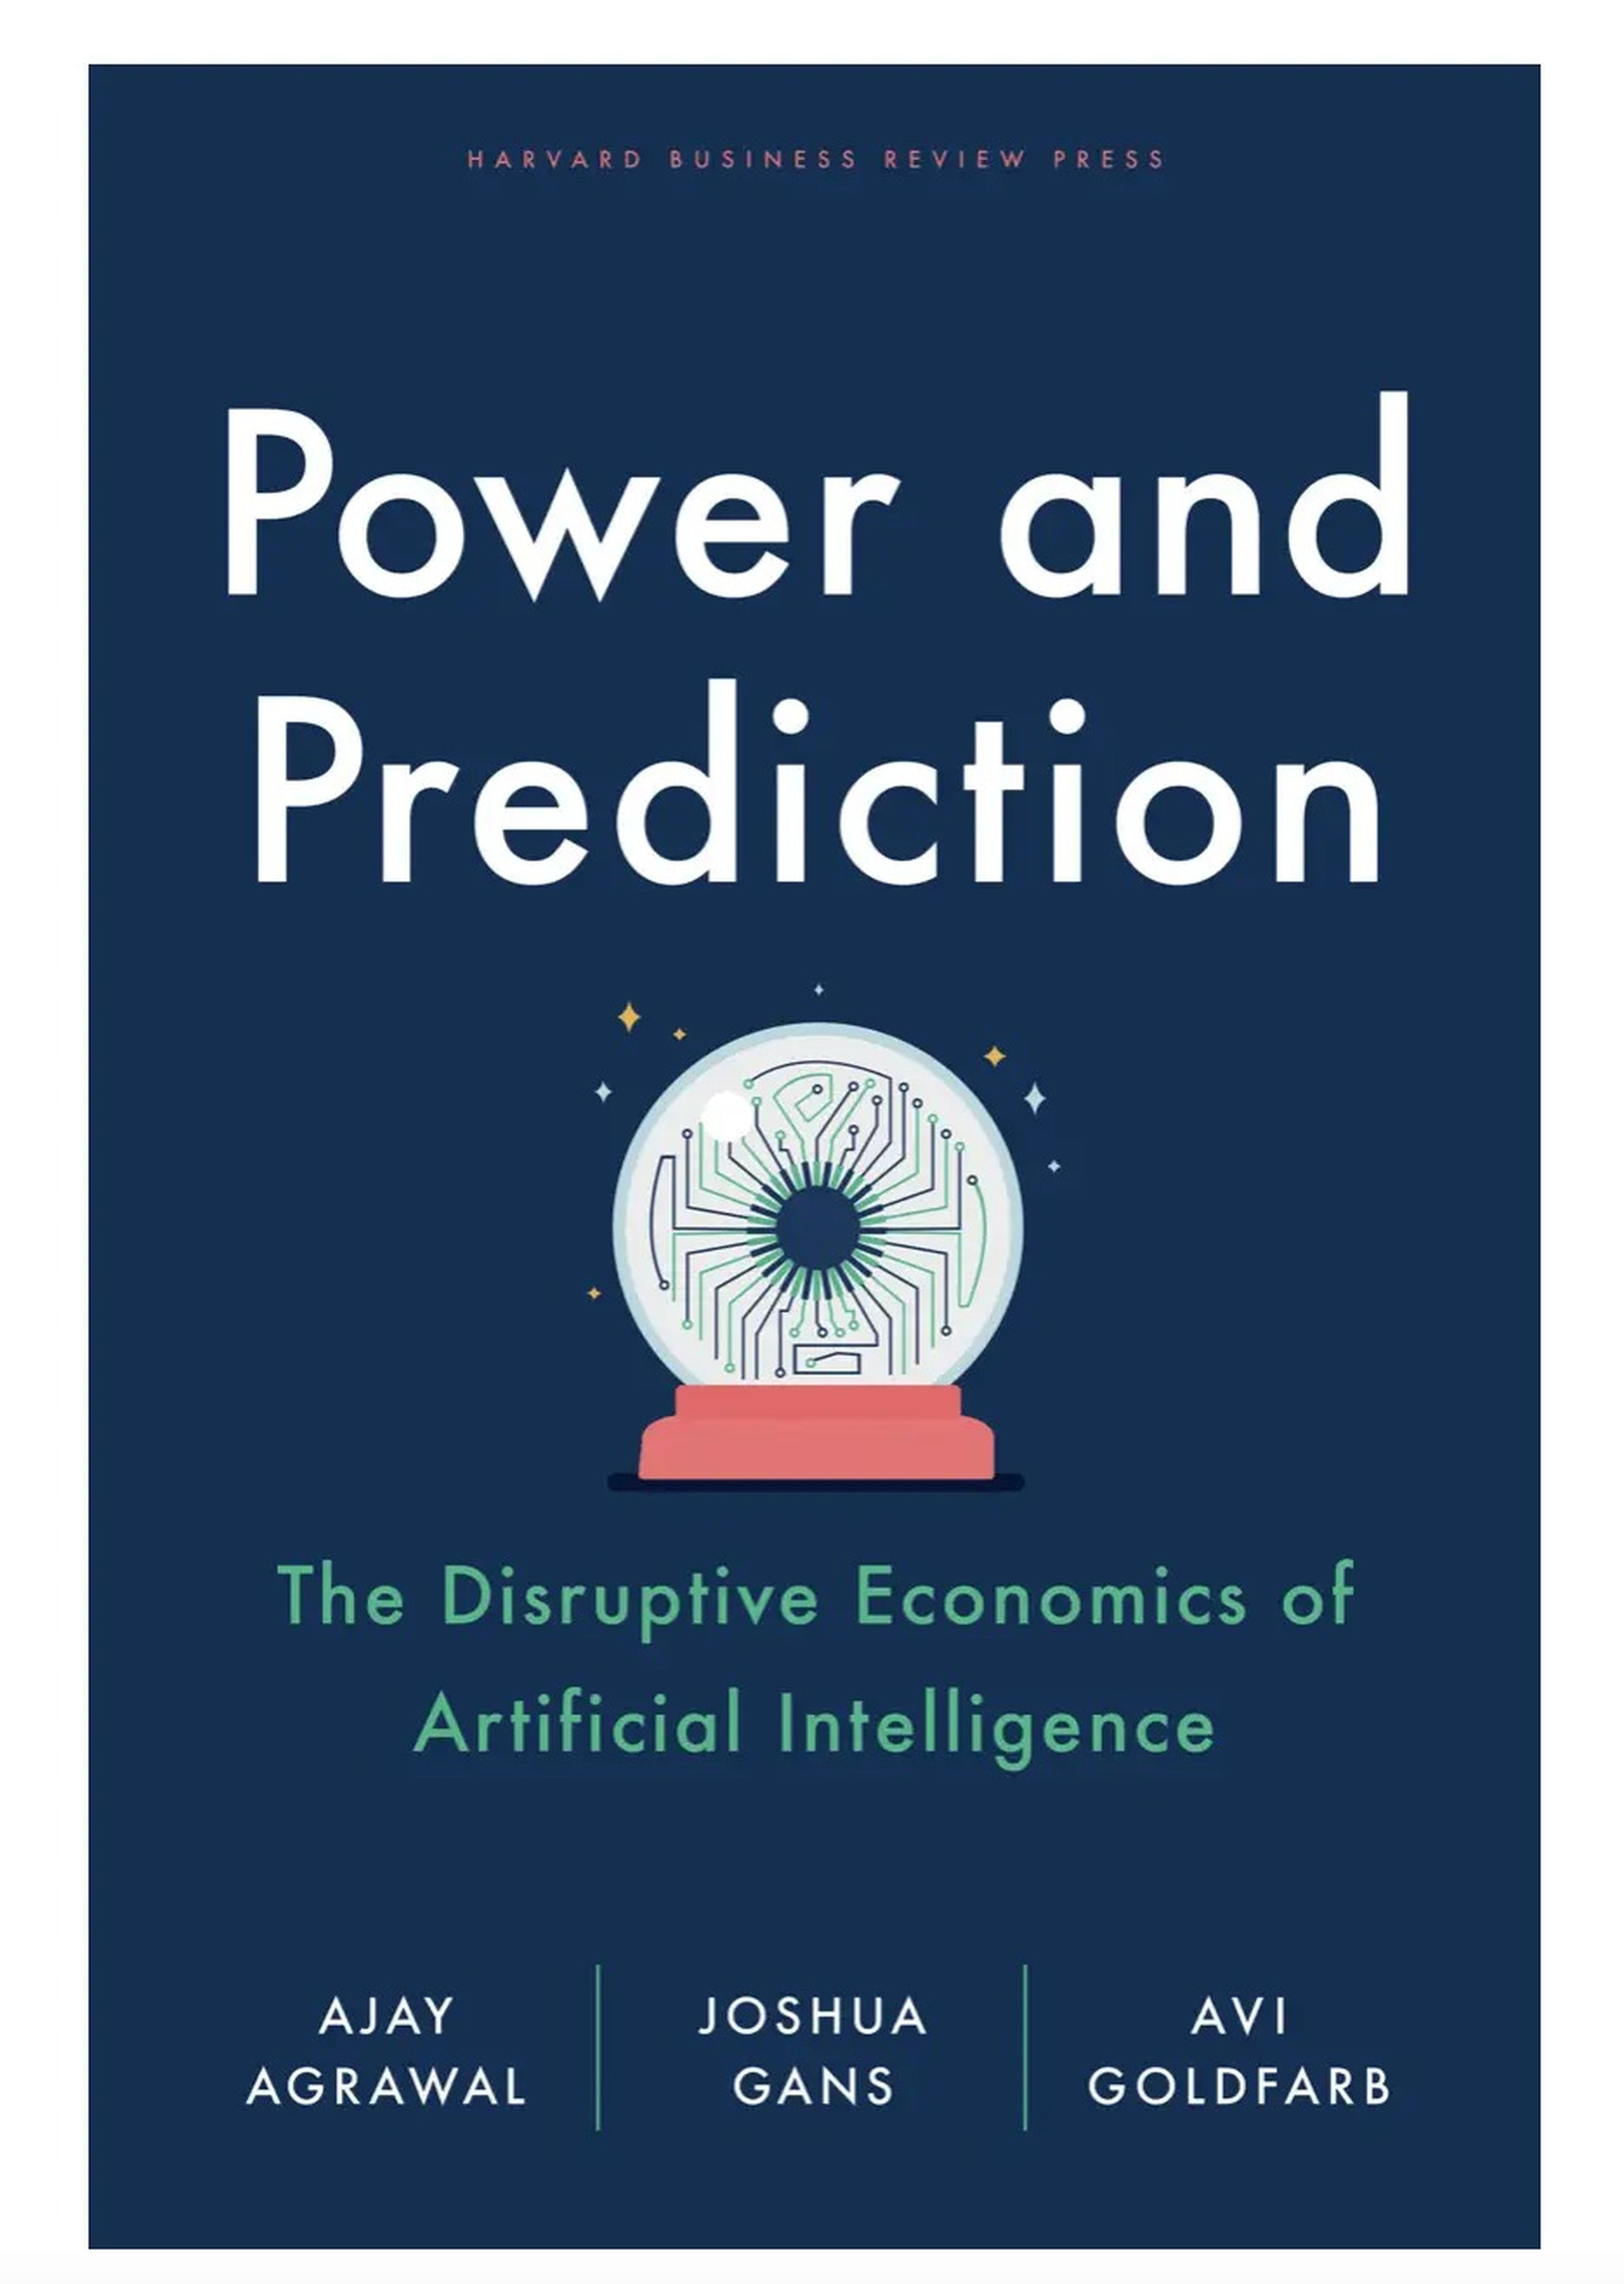 Power and Prediction: The Disruptive Economics of Artificial Intelligence